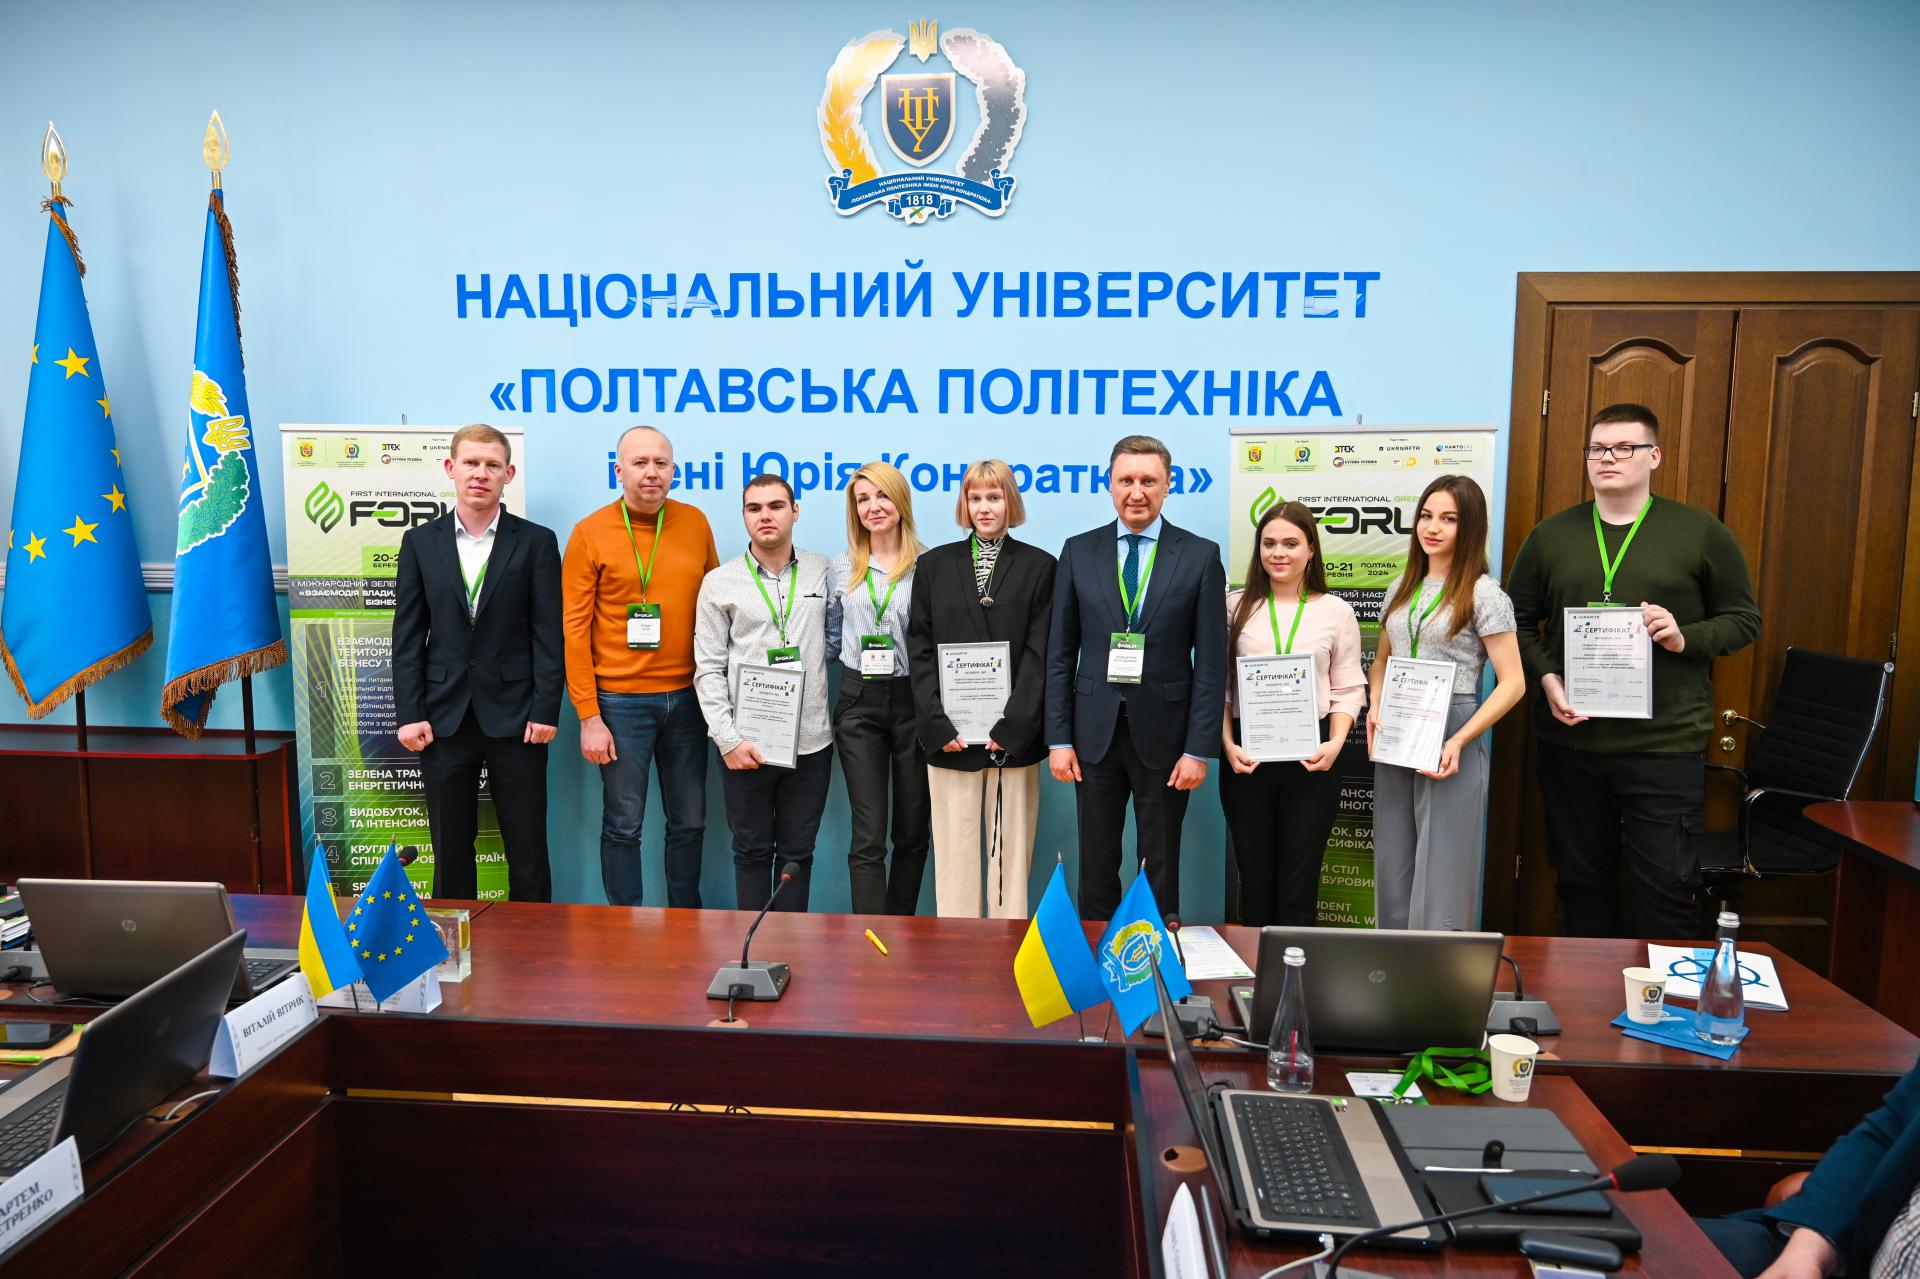 Students receive certificates for personalised scholarships from Ukrnafta